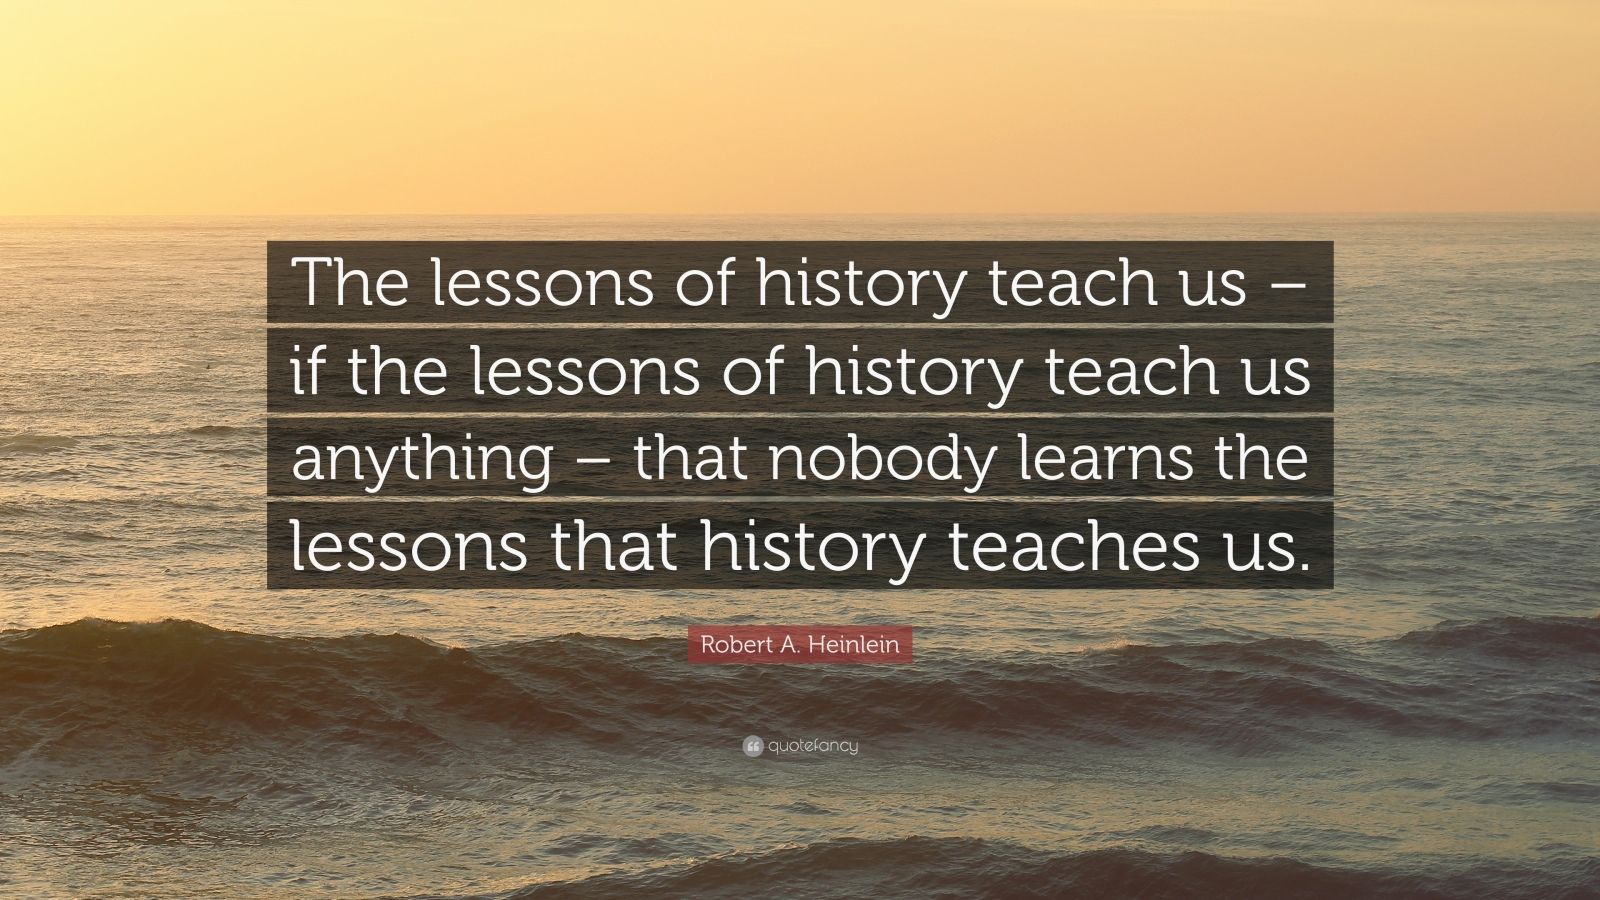 Robert A Heinlein Quote “the Lessons Of History Teach Us If The